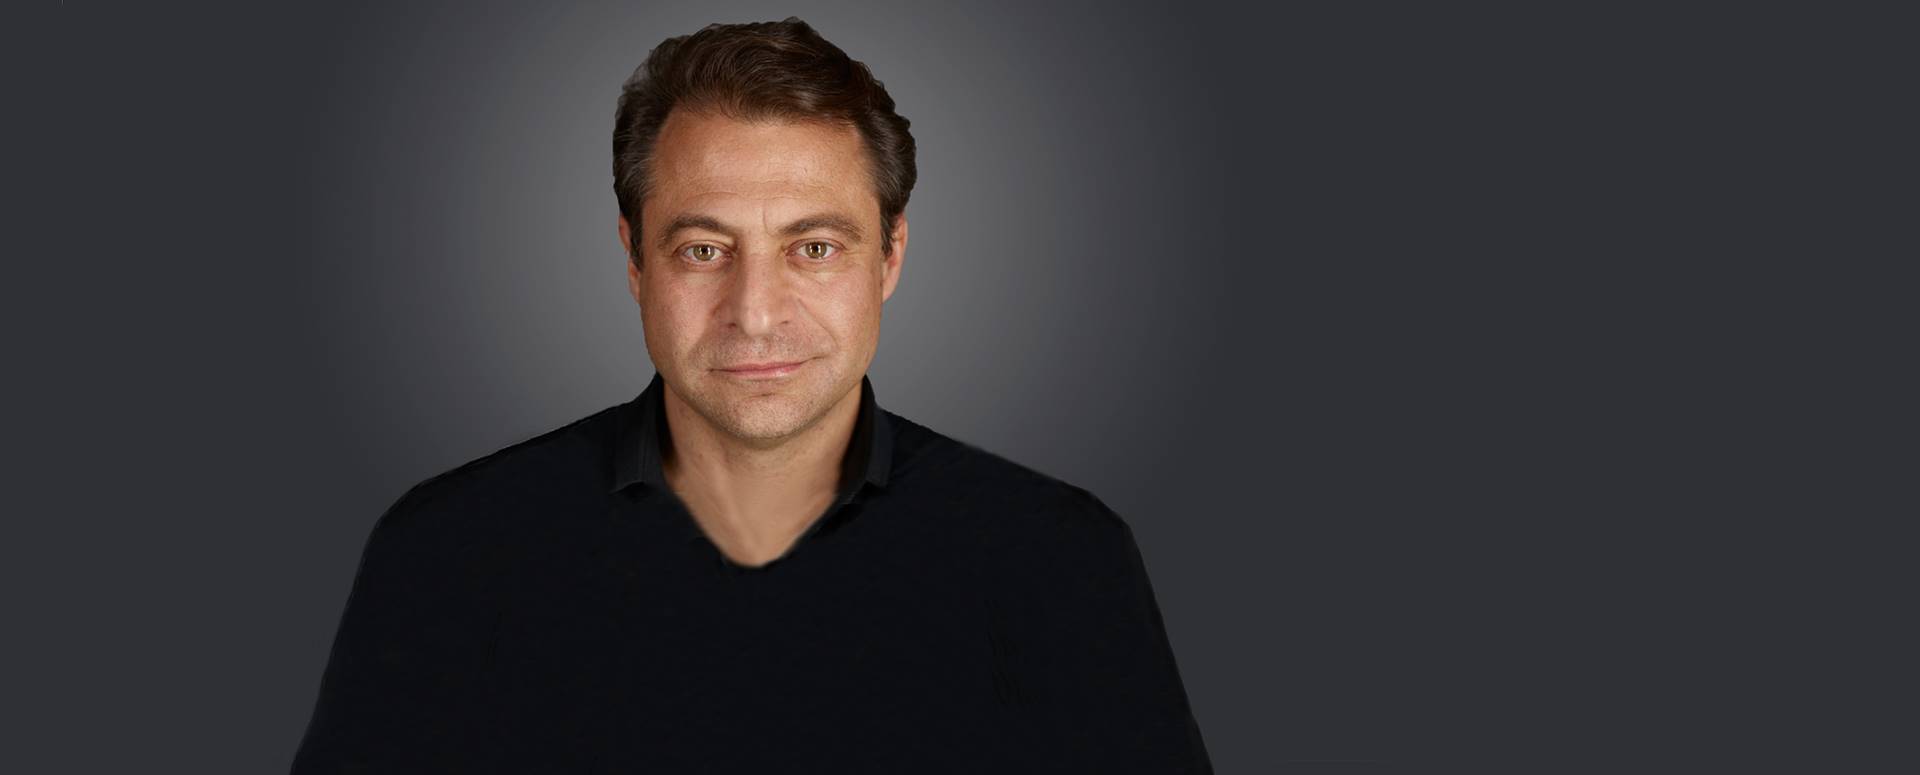 https://www.awesomejourney.ca/great-leaders-series-featuring-peter-diamandis/